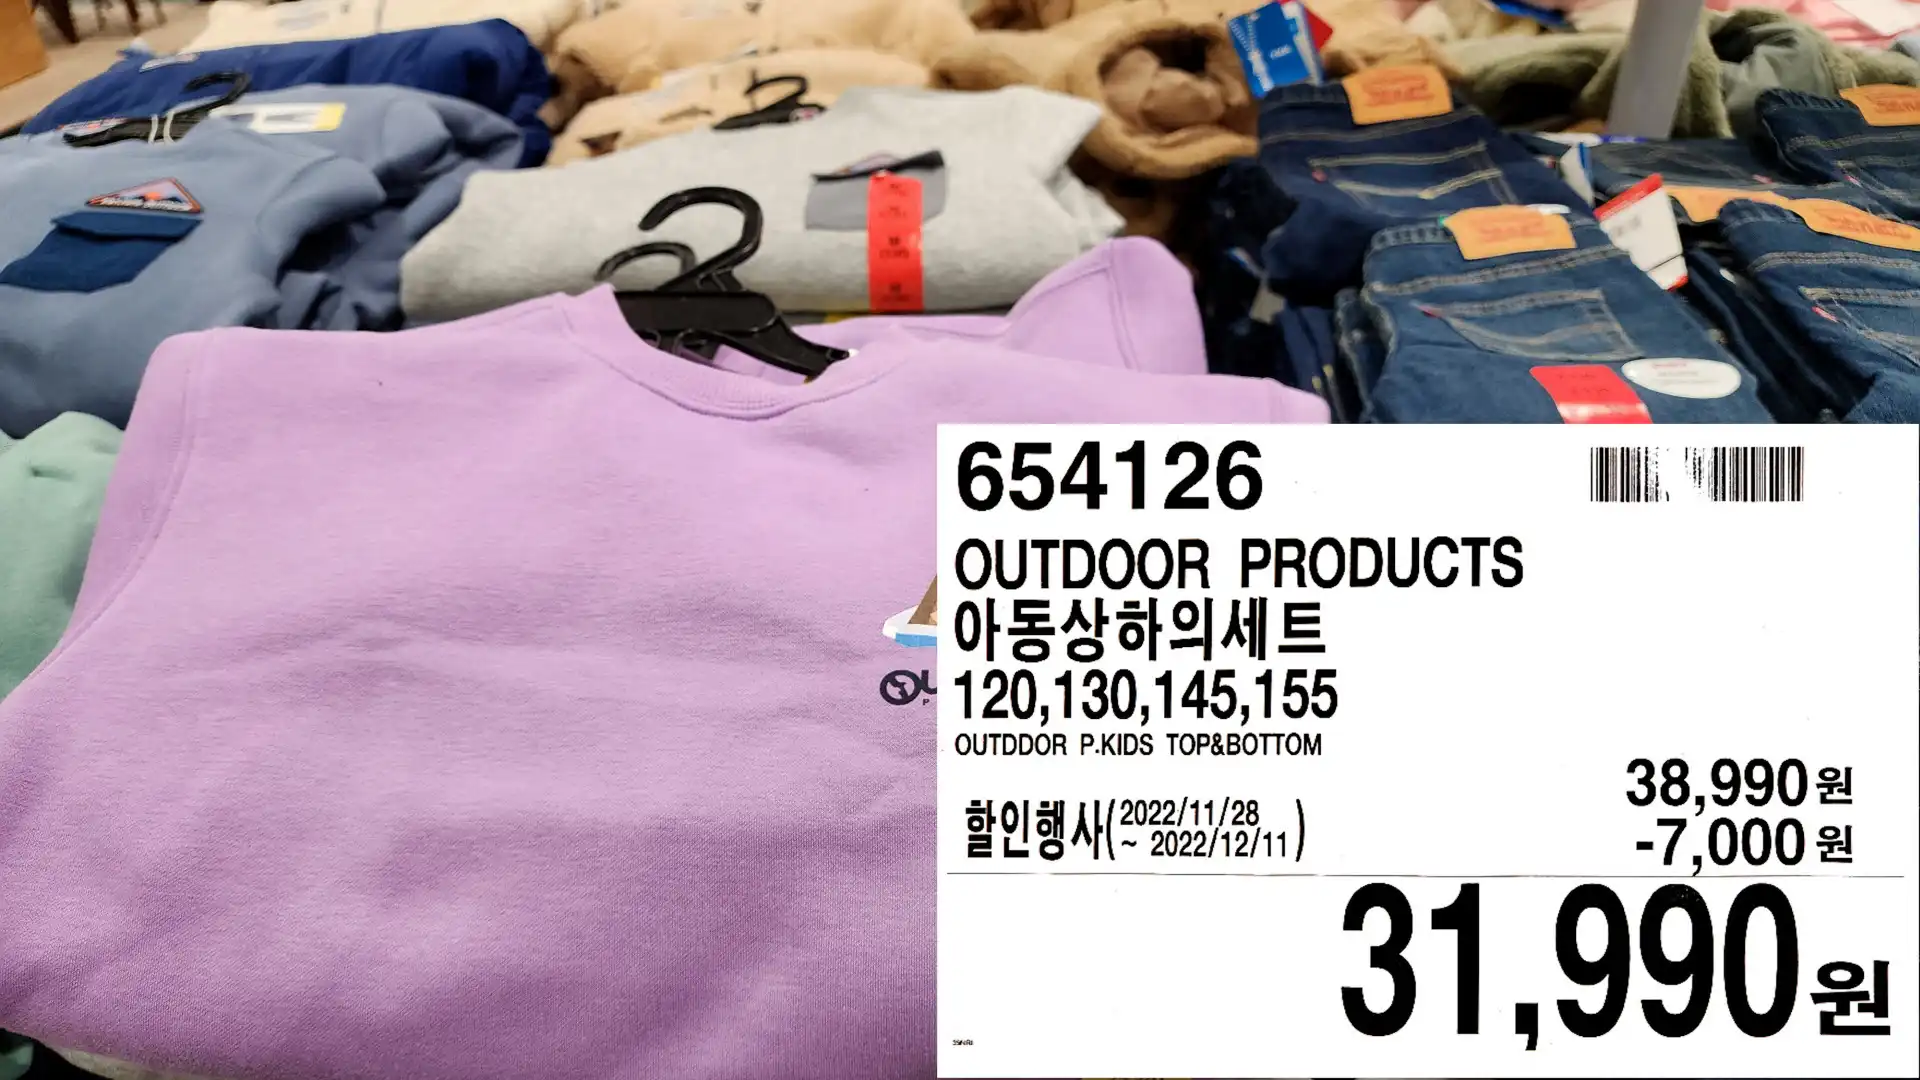 OUTDOOR PRODUCTS
아동상하의세트
120&#44;130&#44;145&#44;155
OUTDDOR P.KIDS TOP&BOTTOM
31&#44;990원